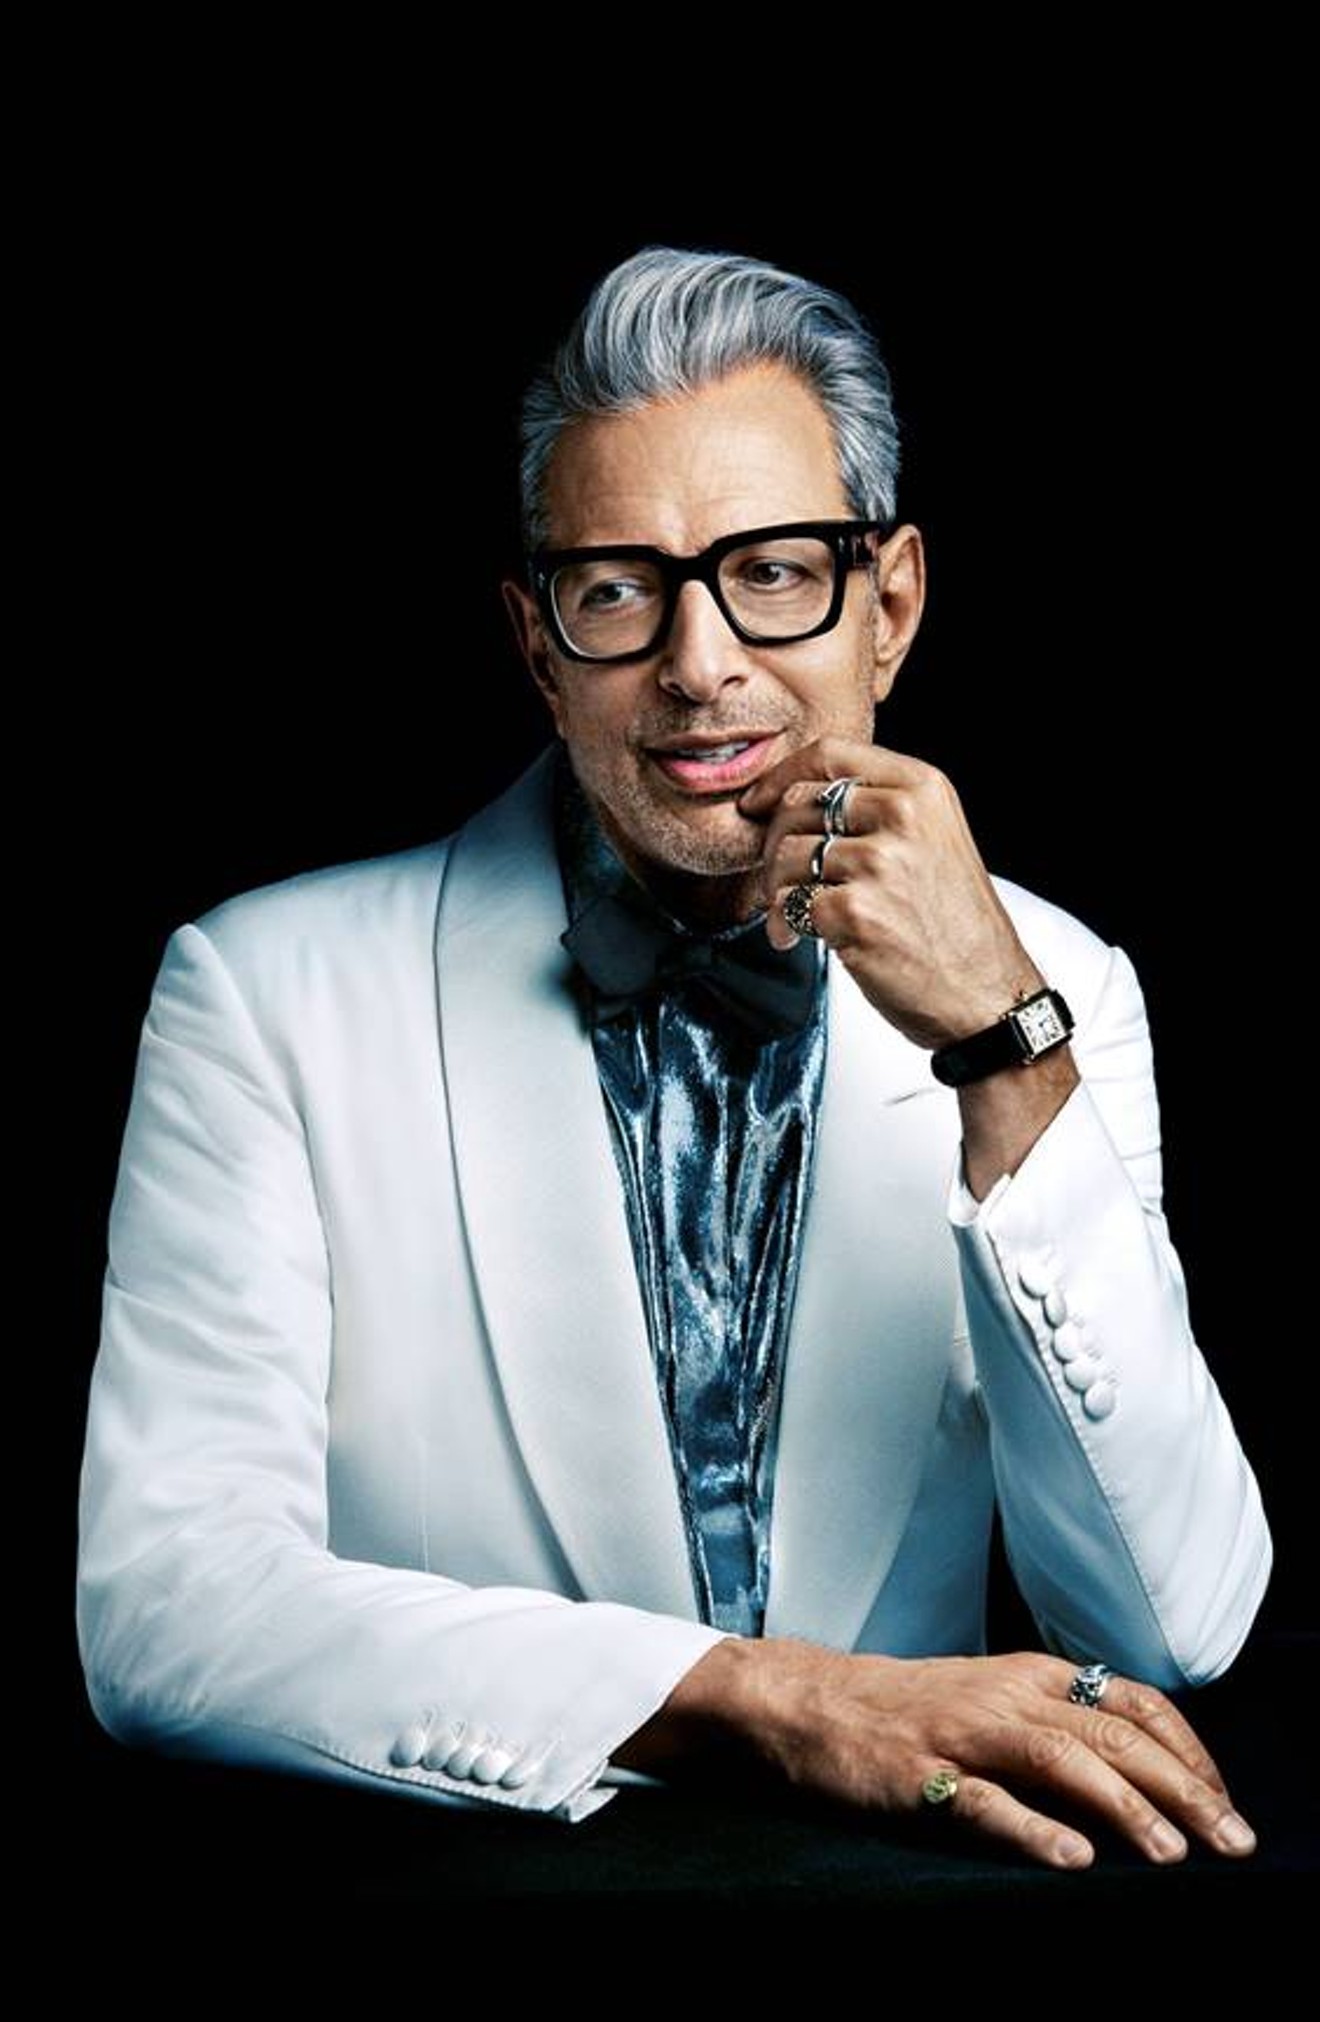 Pop culture icon Jeff Goldblum shared some of his jolly wisdom ahead of his Dallas show.